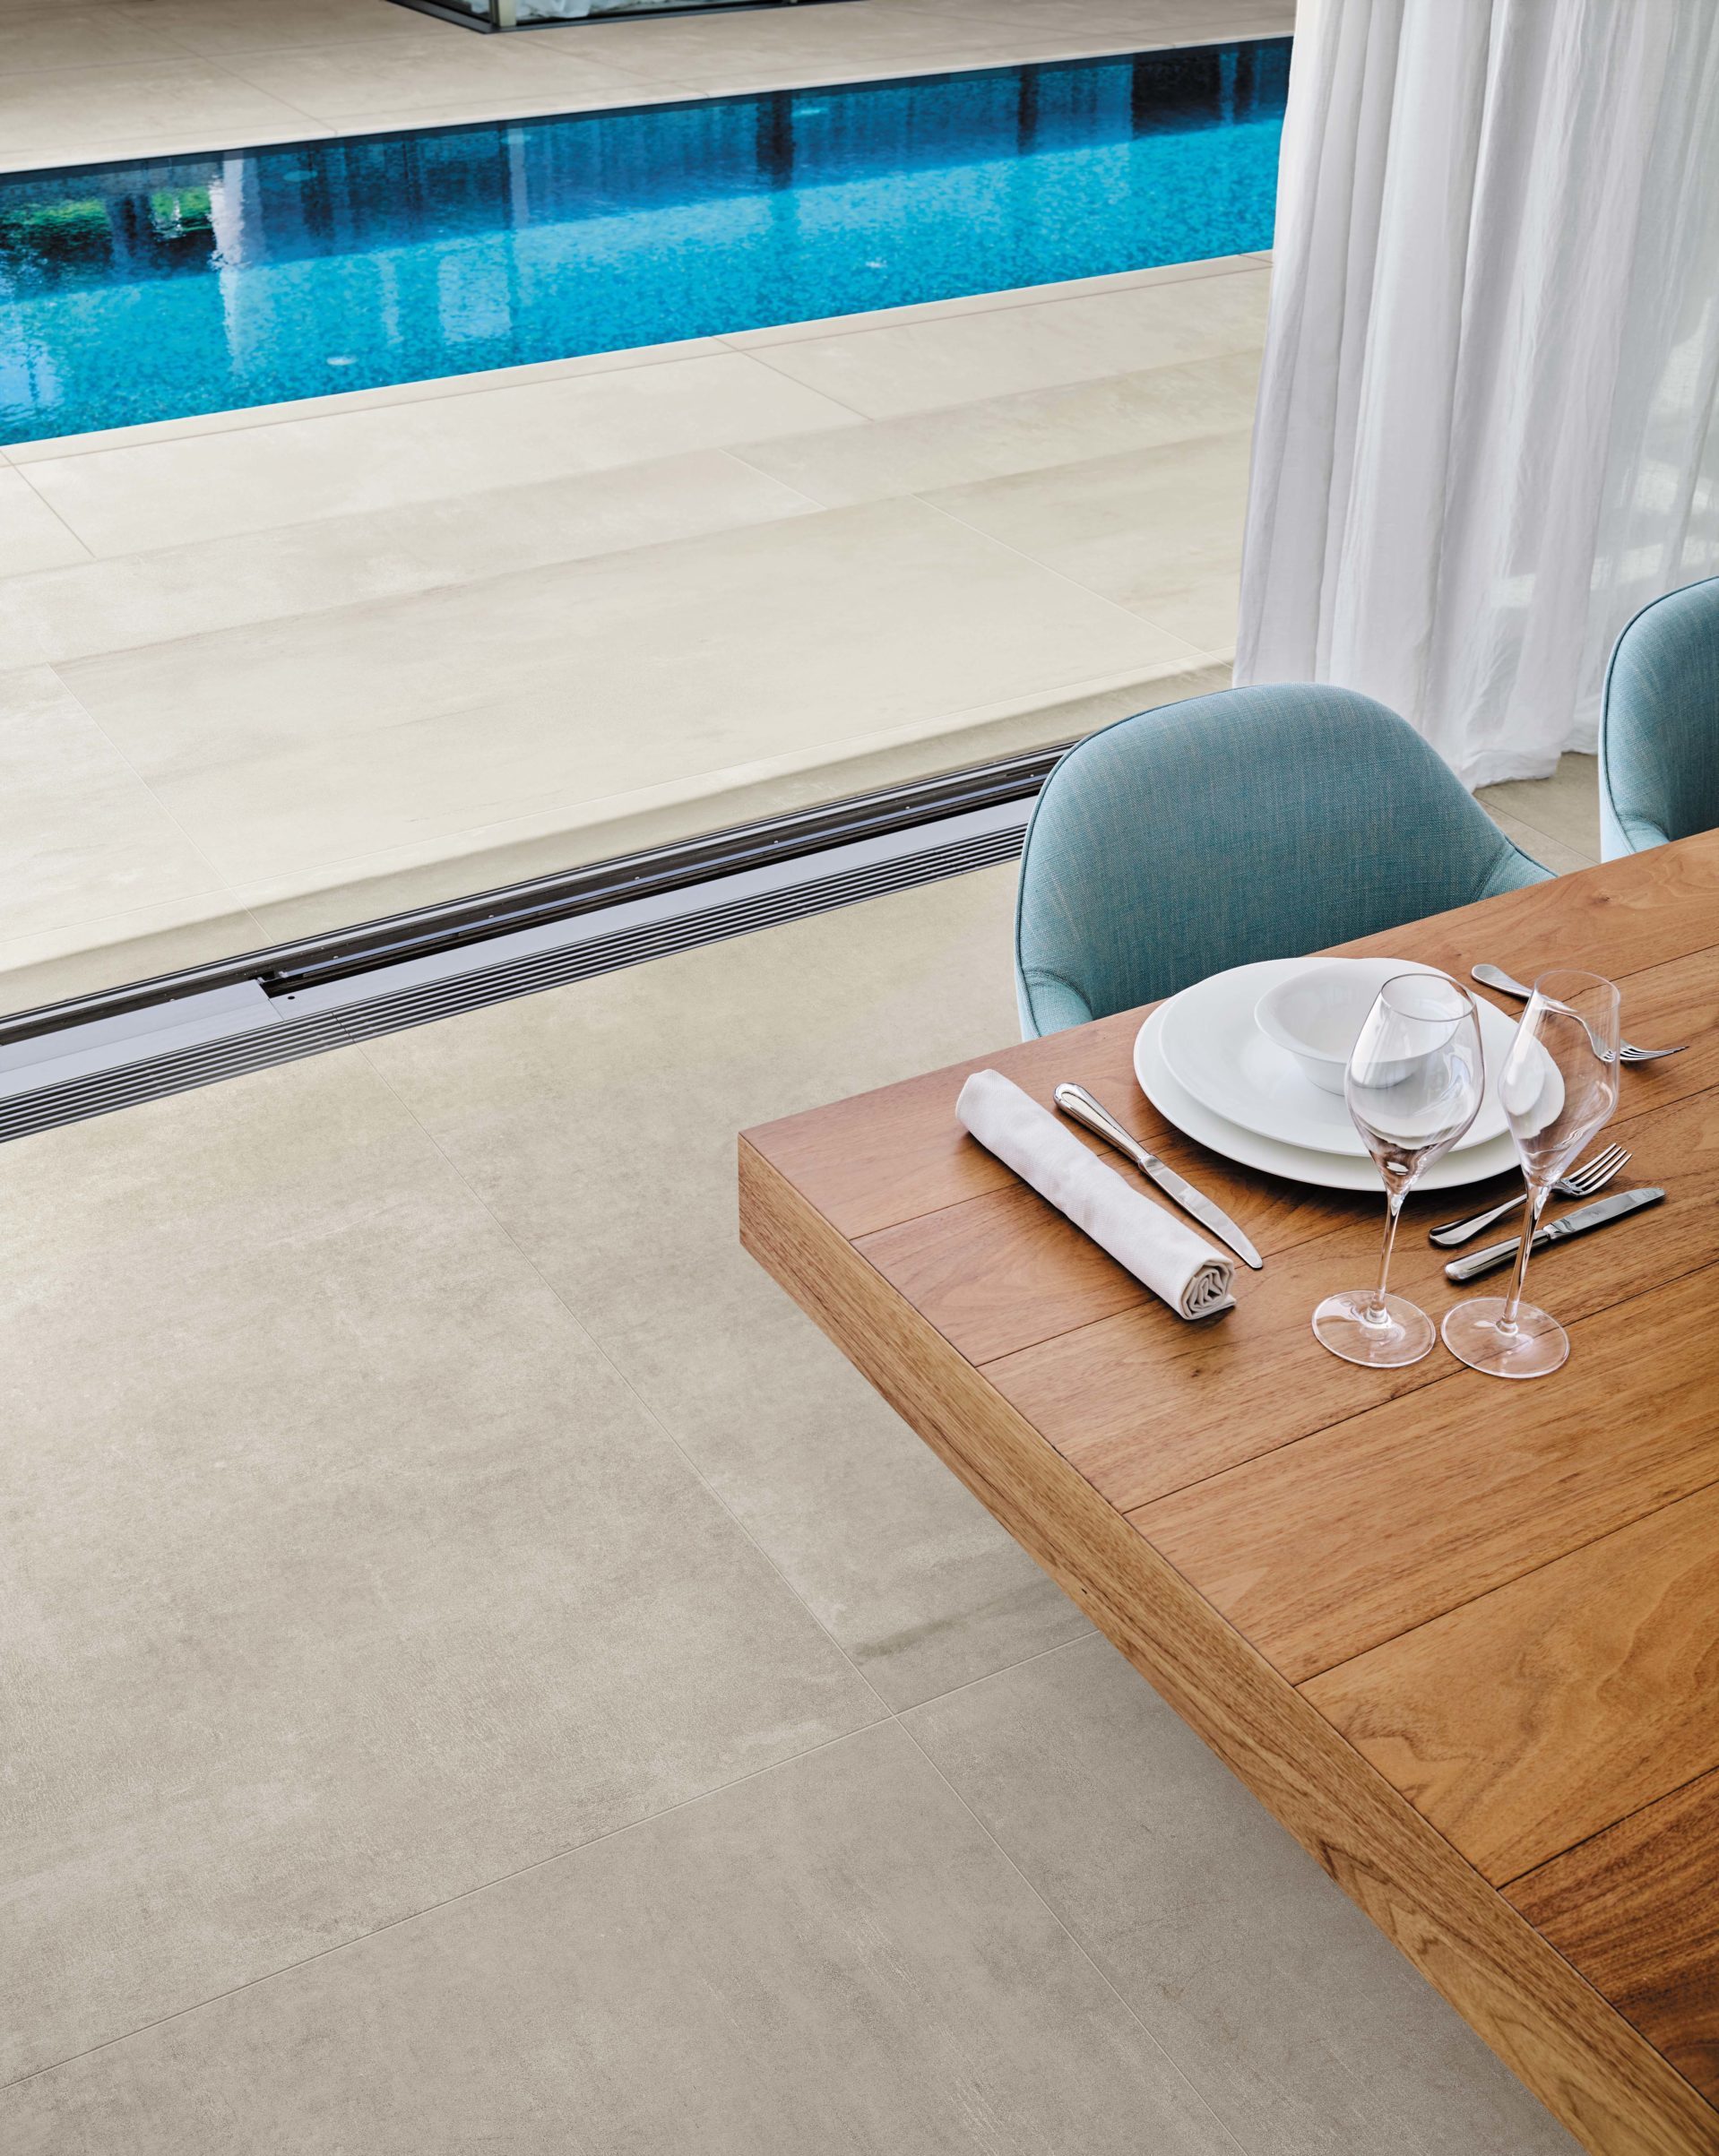 Boost porcelain tile in white installed on the floor in an indoor-outdoor area.